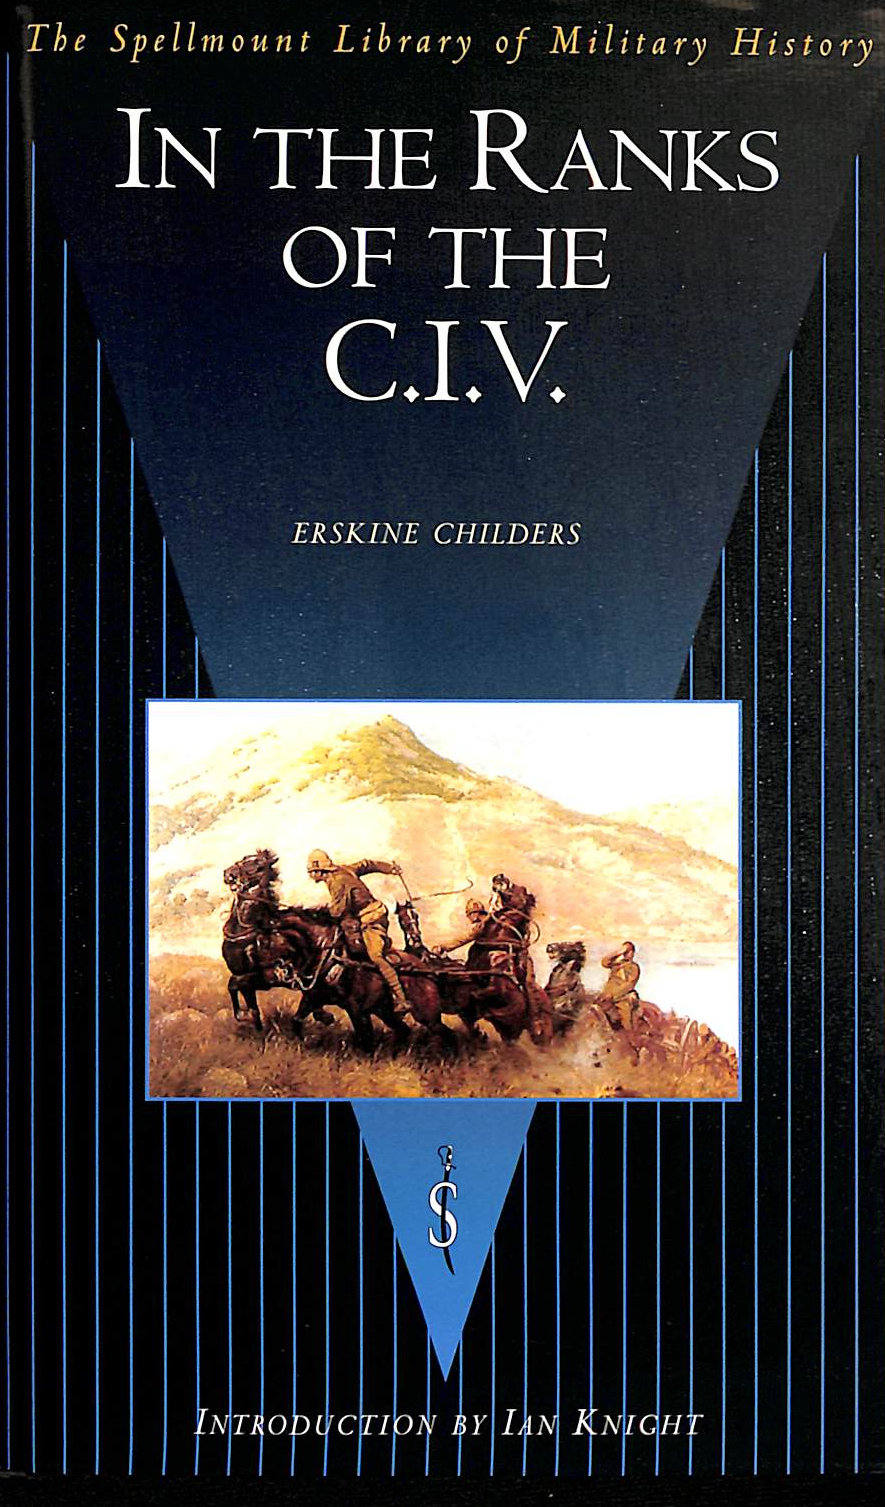 ERSKINE CHILDERS - In the Ranks of the C.I.V. (Spellmount Library of Military History) (The Spellmount Library of Military History)